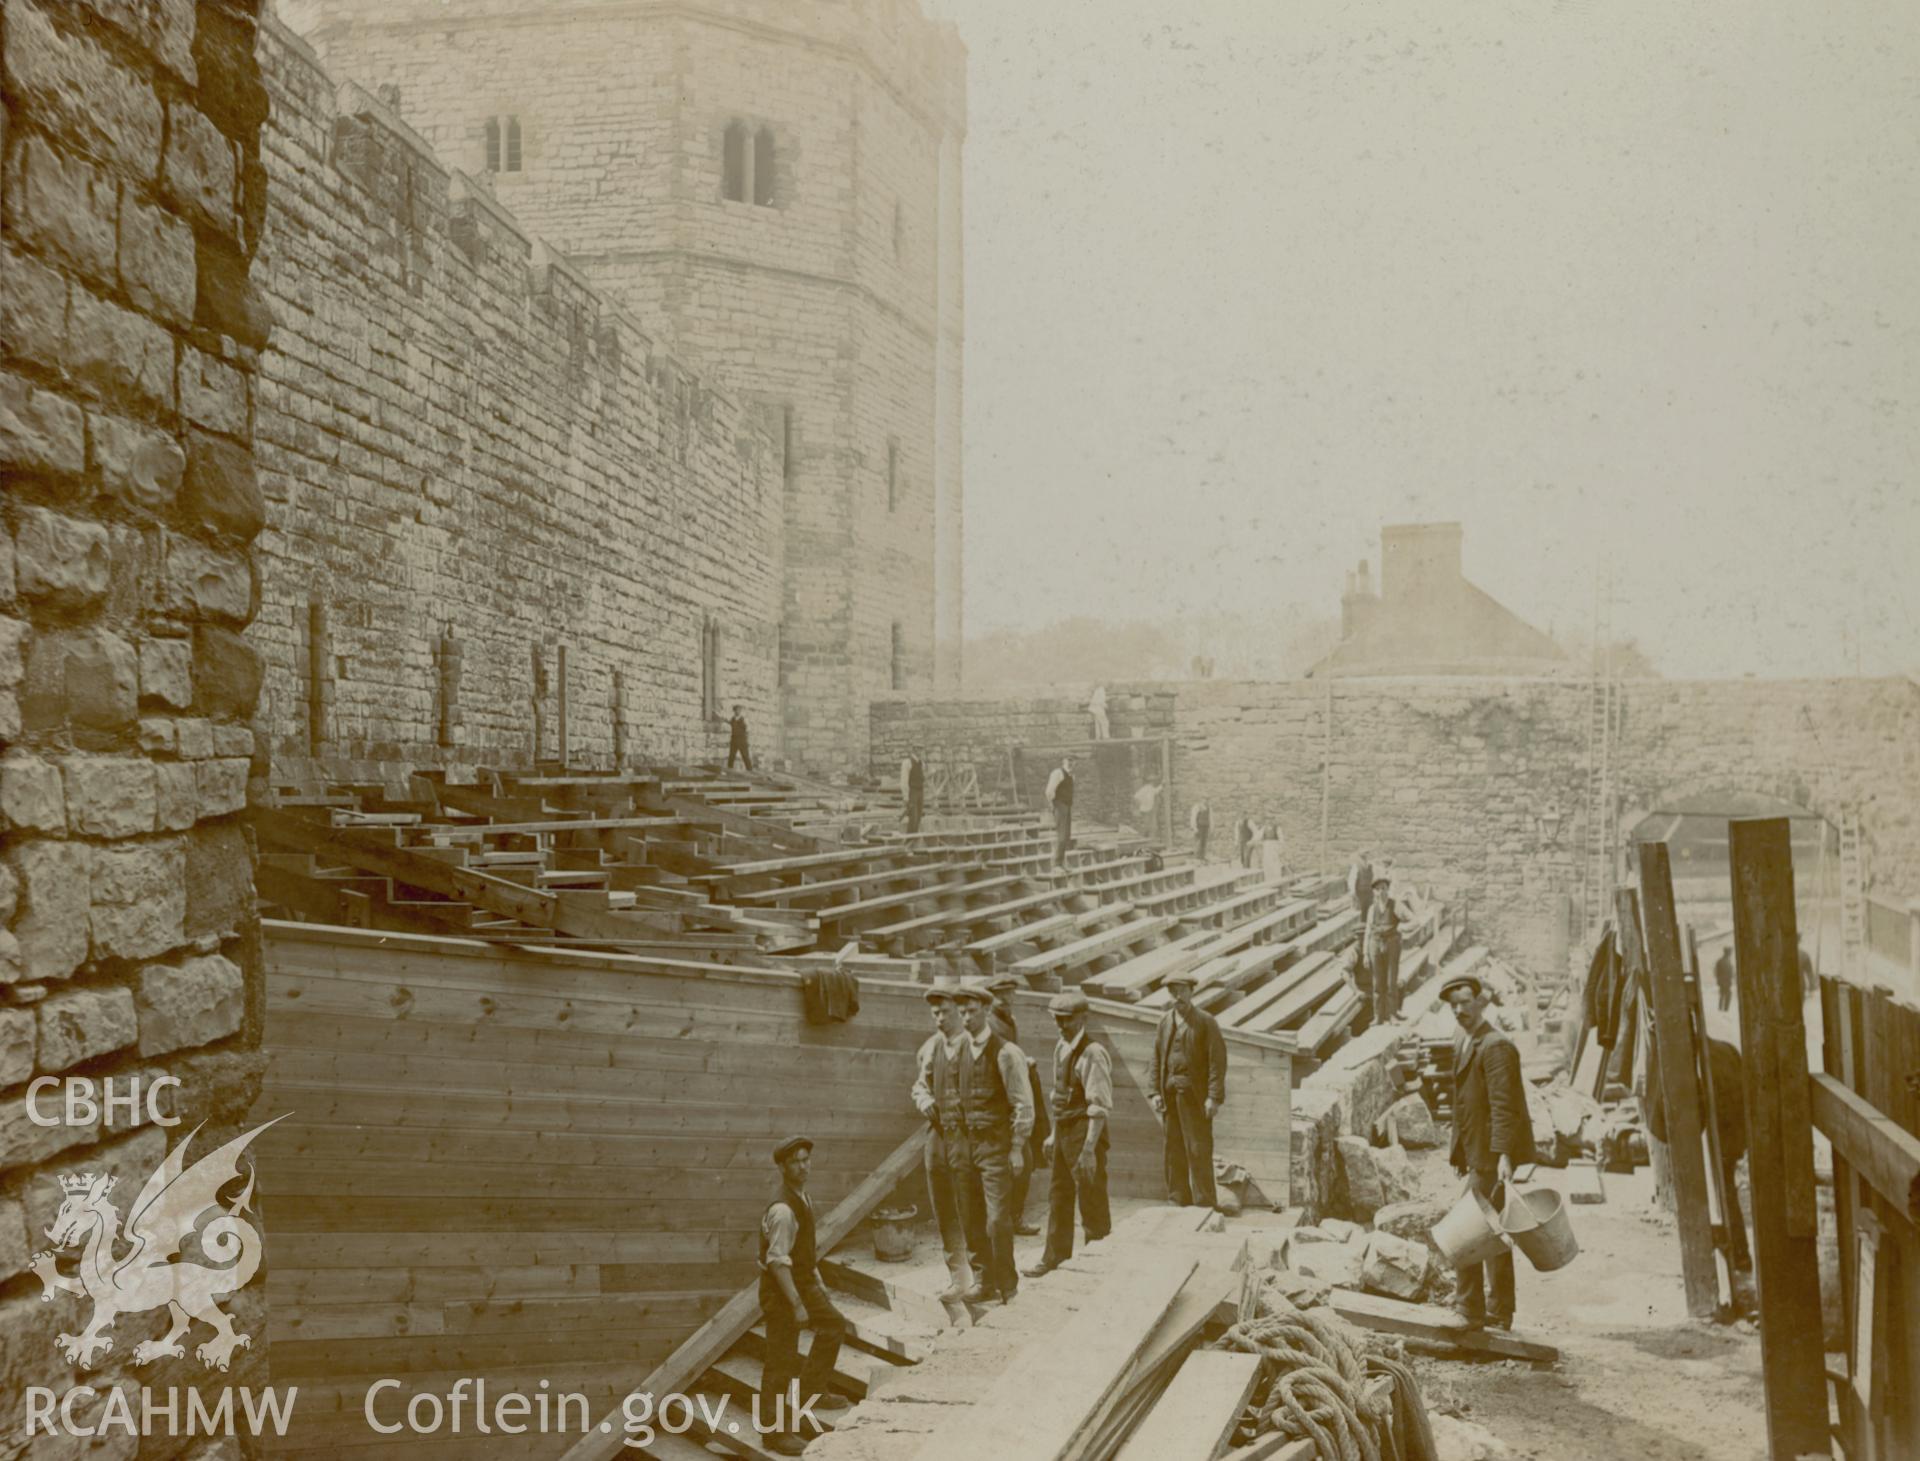 Digital copy of black and white photograph relating to Caernarfon Castle: showing preparations for the Investiture of the Prince of Wales in 1911.